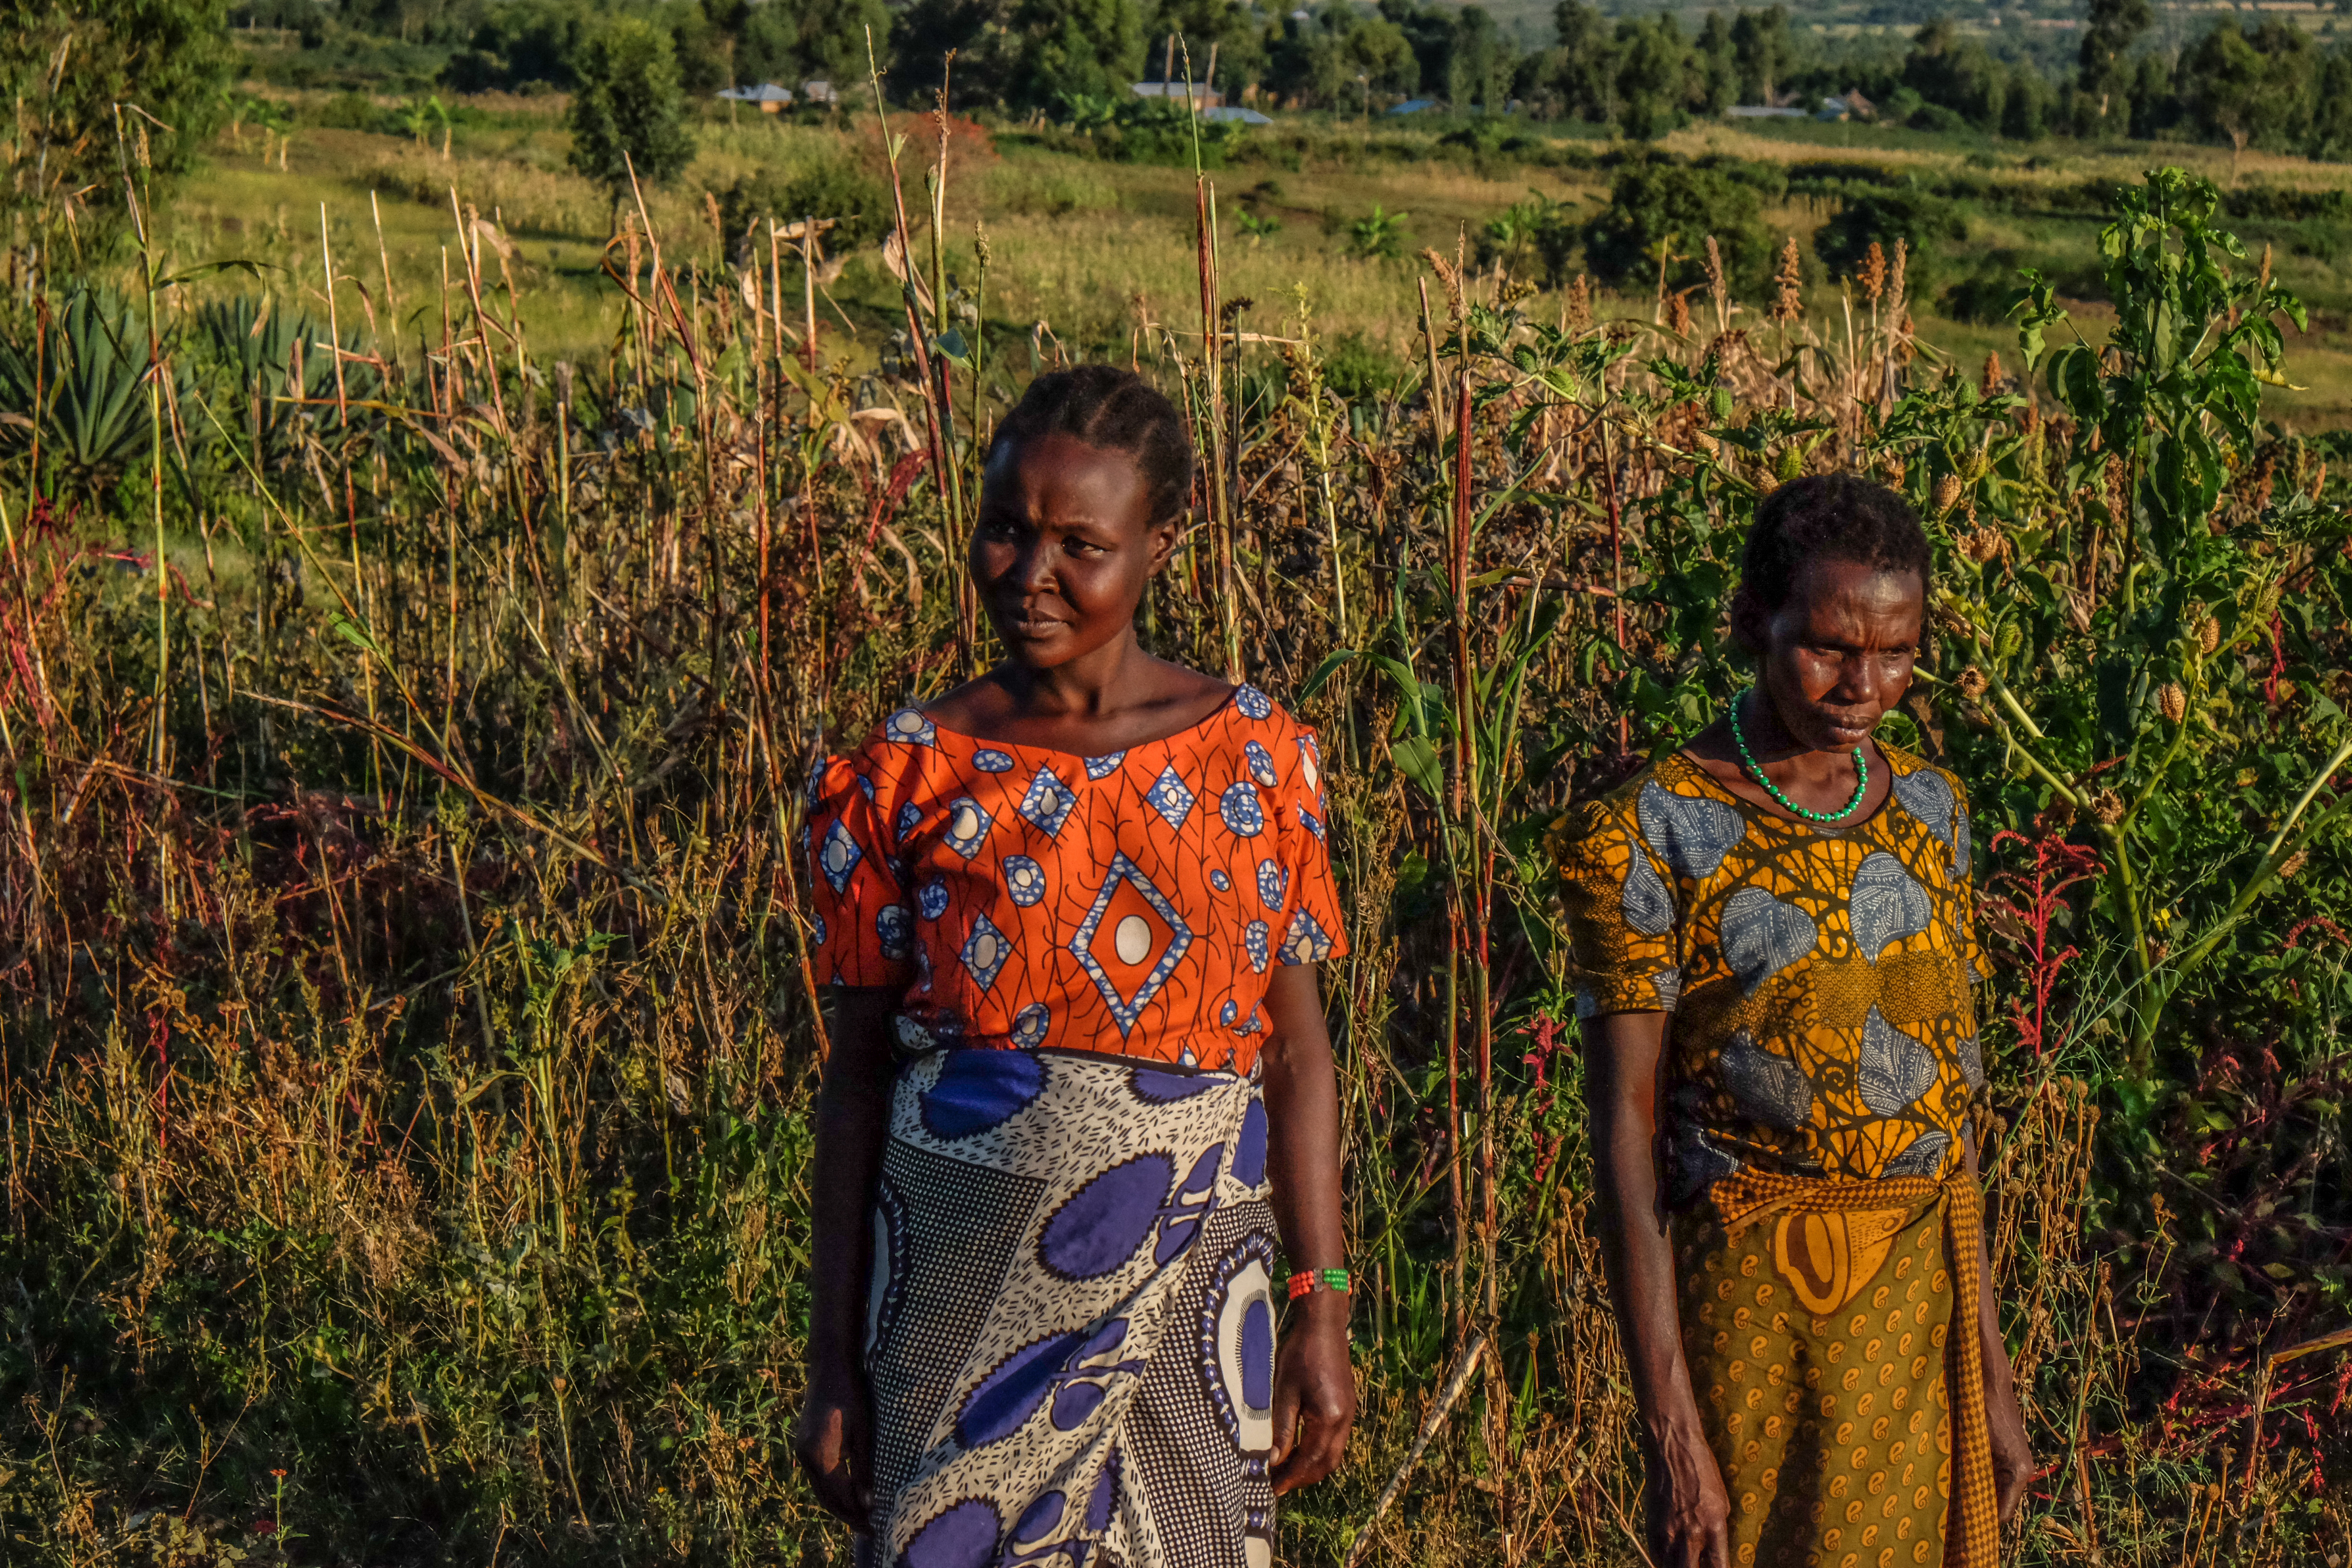 Straight Women Are Marrying Each Other for Safety in Tanzania